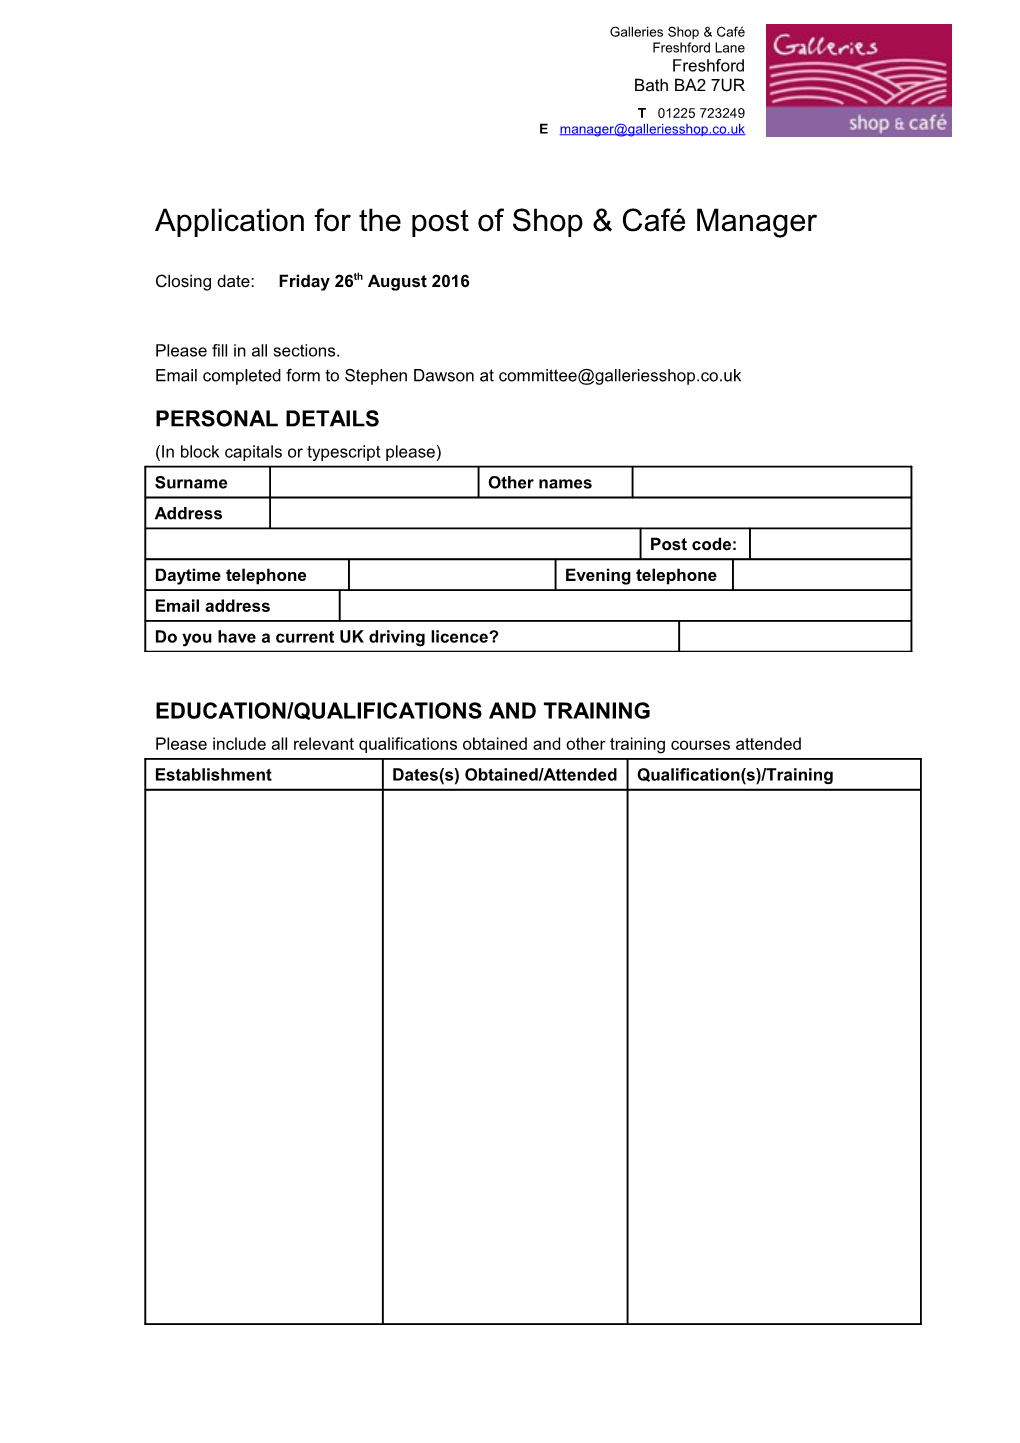 Application for the Post of Shop& Café Manager